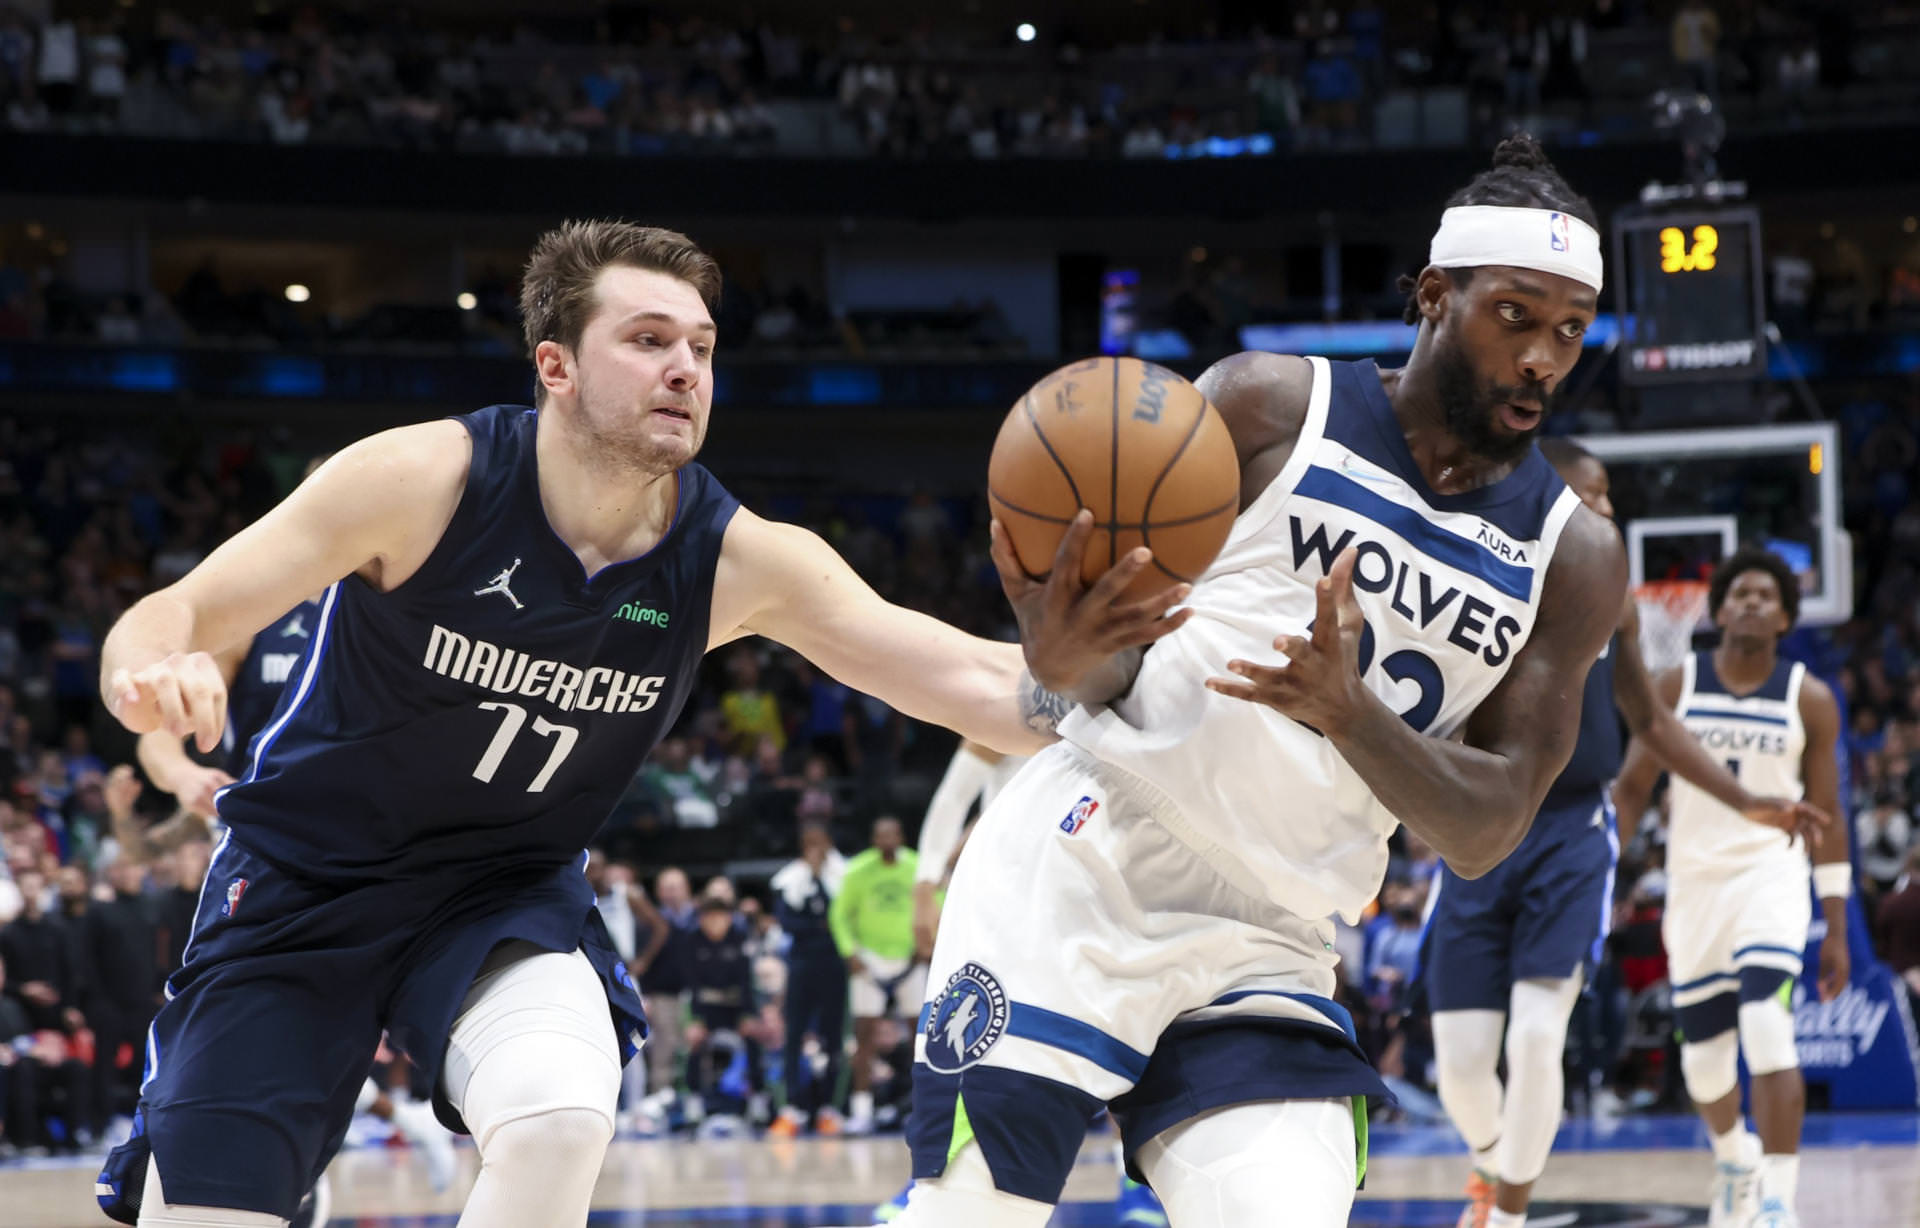 Dallas Mavericks guard Luka Doncic (77) fouls Minnesota Timberwolves guard Patrick Beverley (22) during the fourth quarter at American Airlines Center.